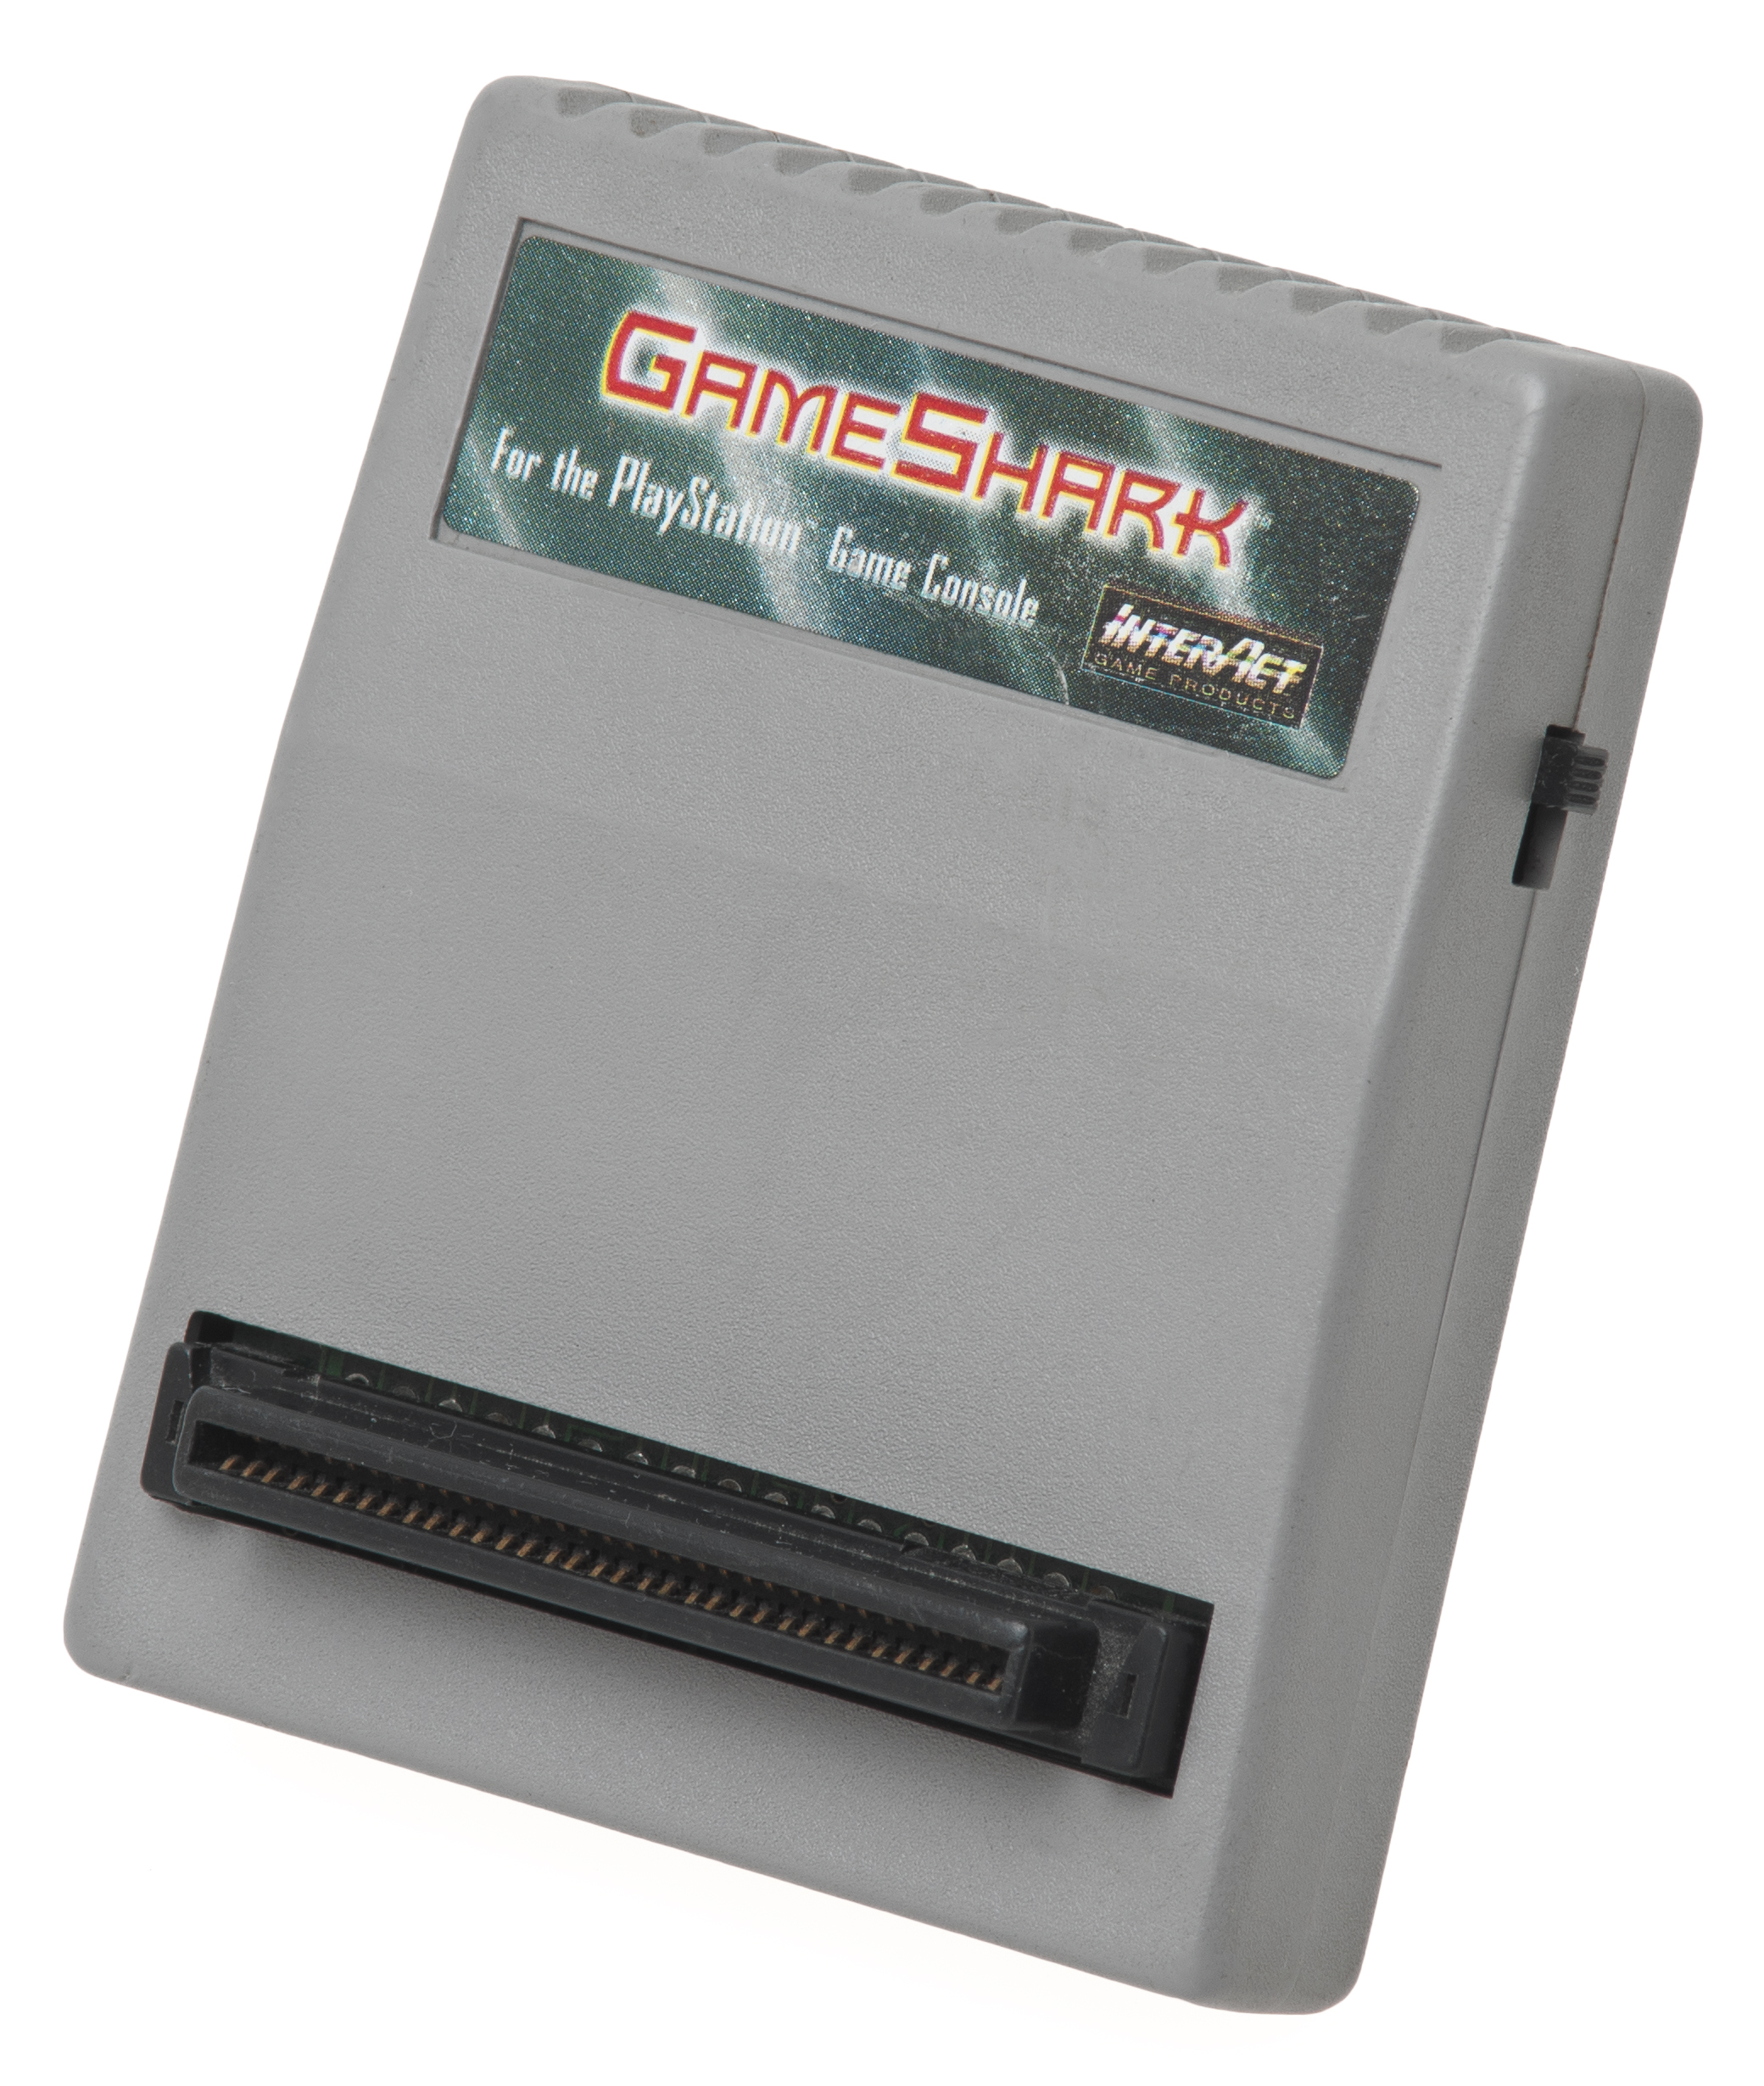 download gameshark ps1 for pc